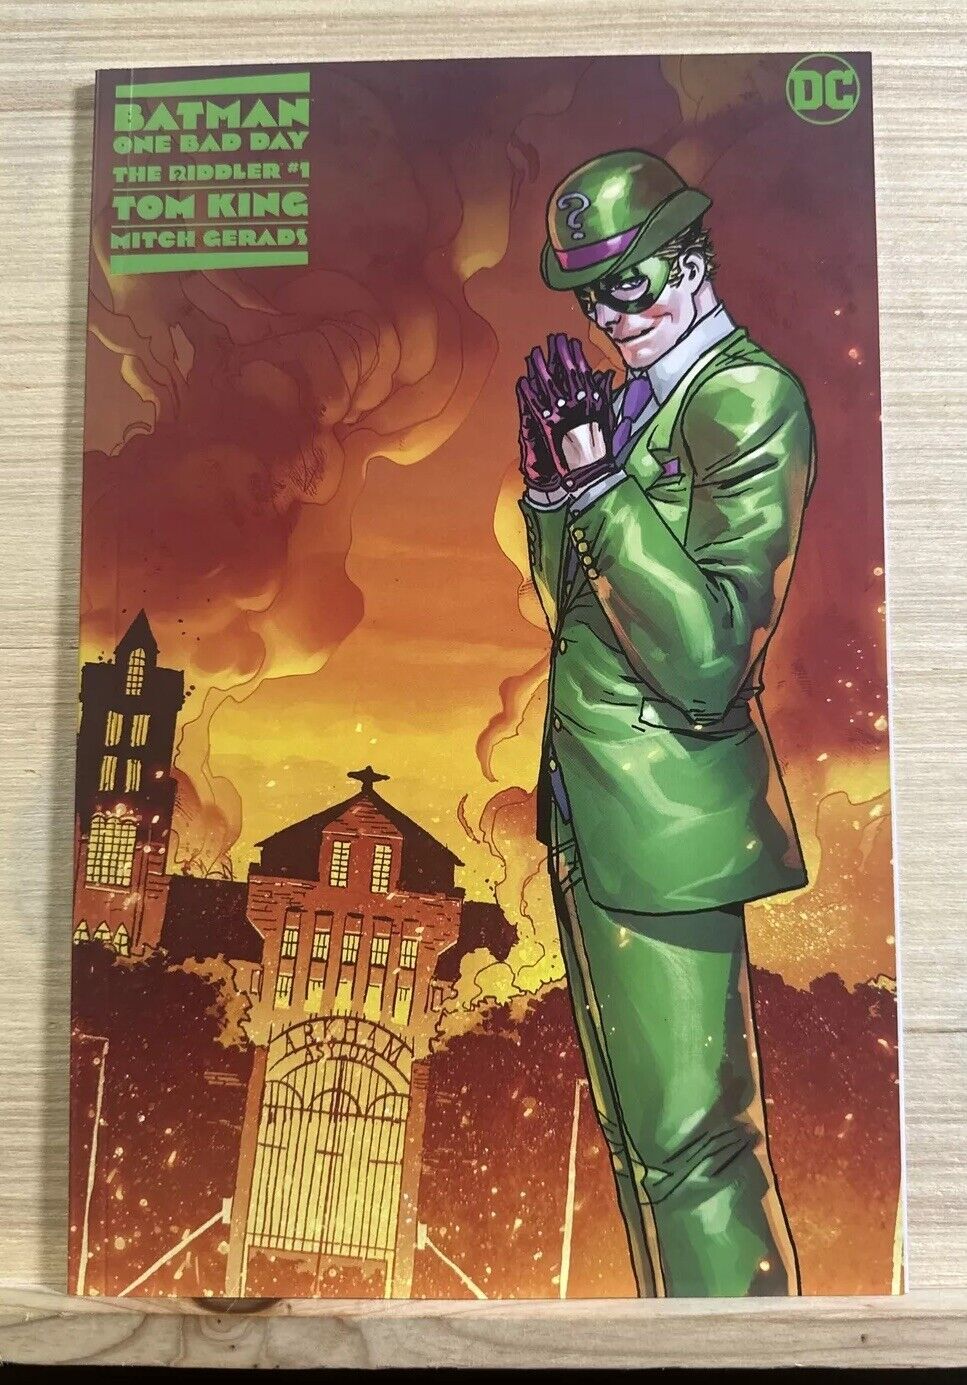 Batman One Bad Day (2022) The Riddler #1 Variant Cover